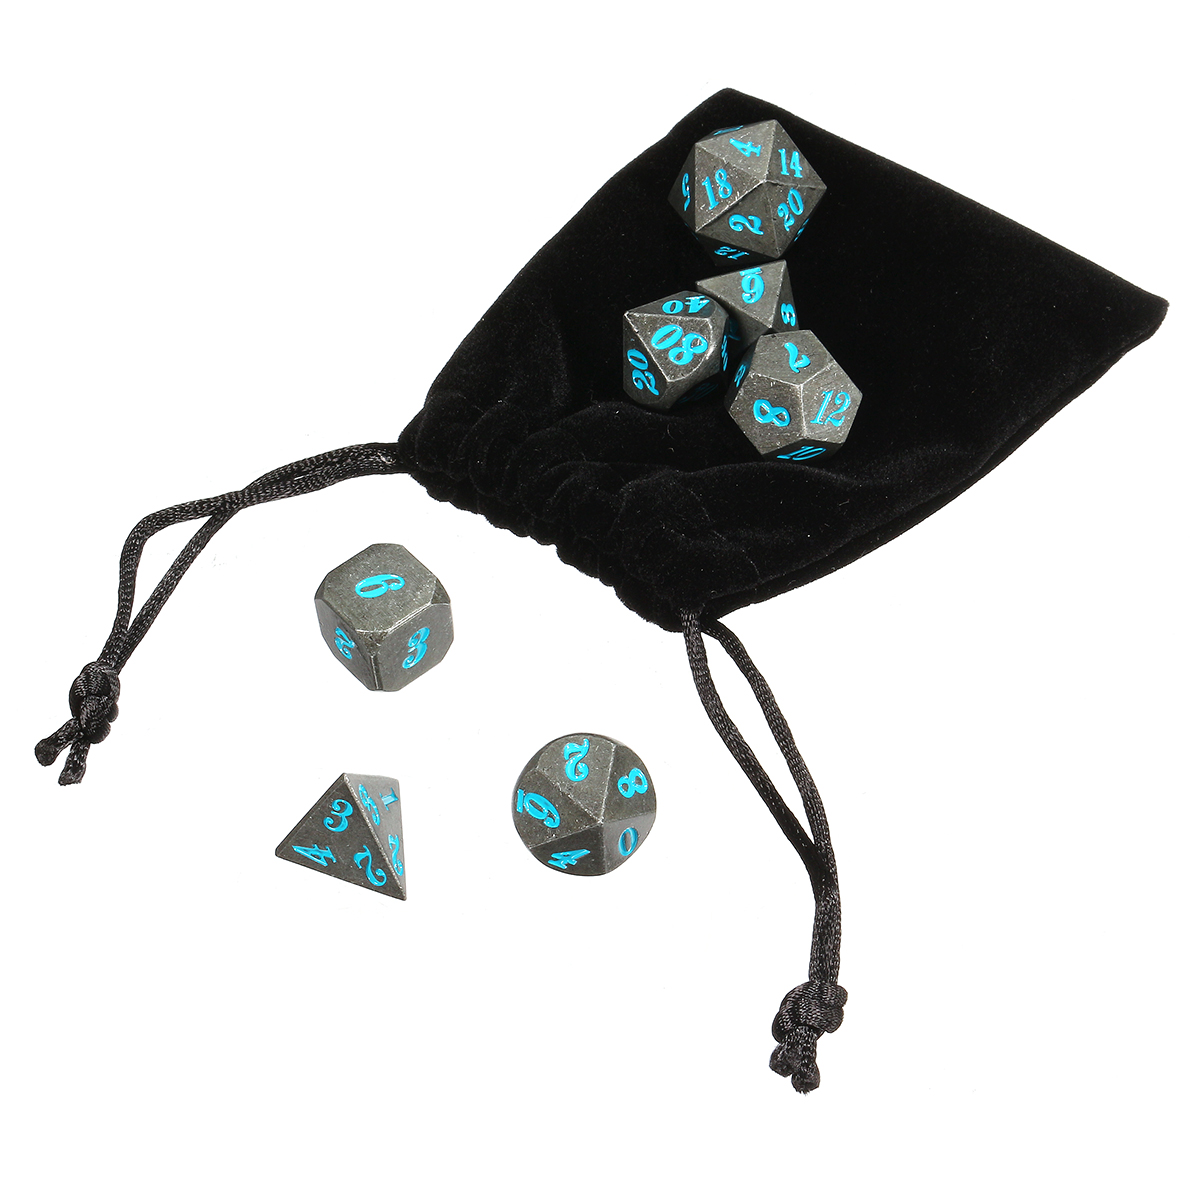 Antique-Metal-7-Pcs-Multisided-Dice-Heavy-Metal-Polyhedral-Dices-Set-w-Bag-1292360-4